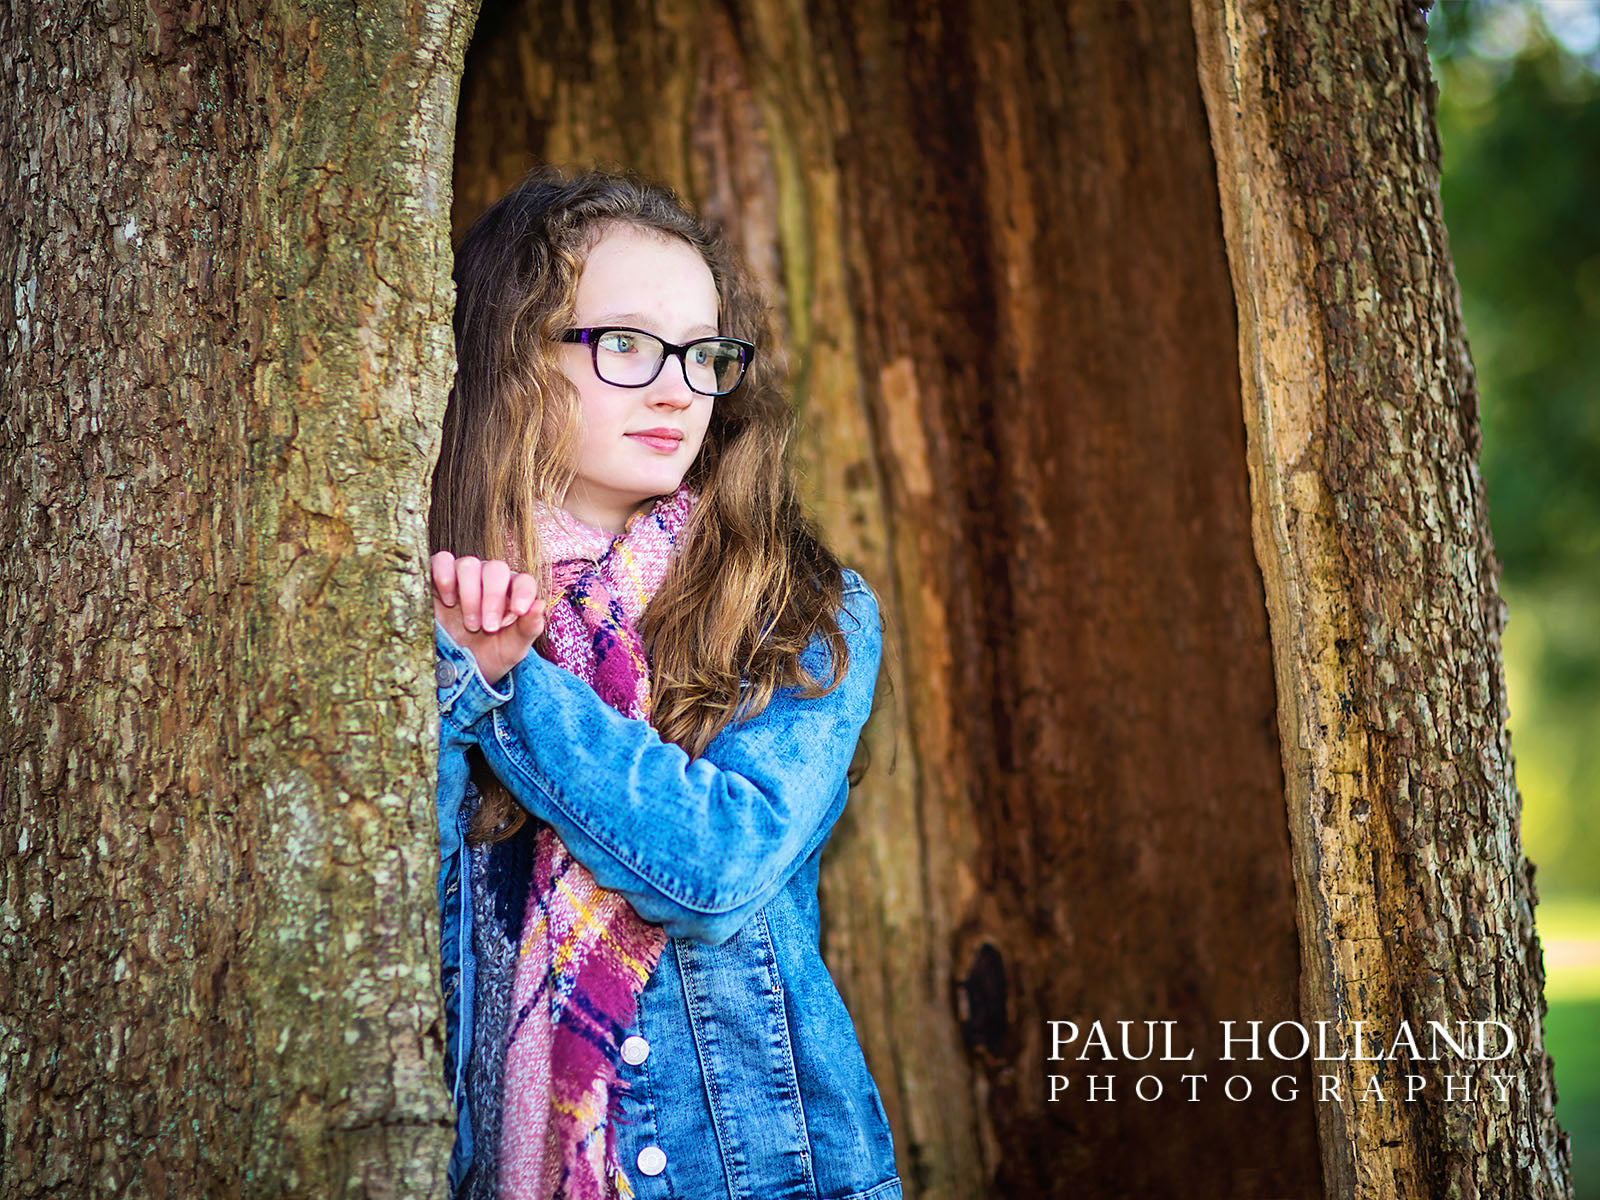 Outdoor Photo Shoot - 1 person & Fine Art Print Package